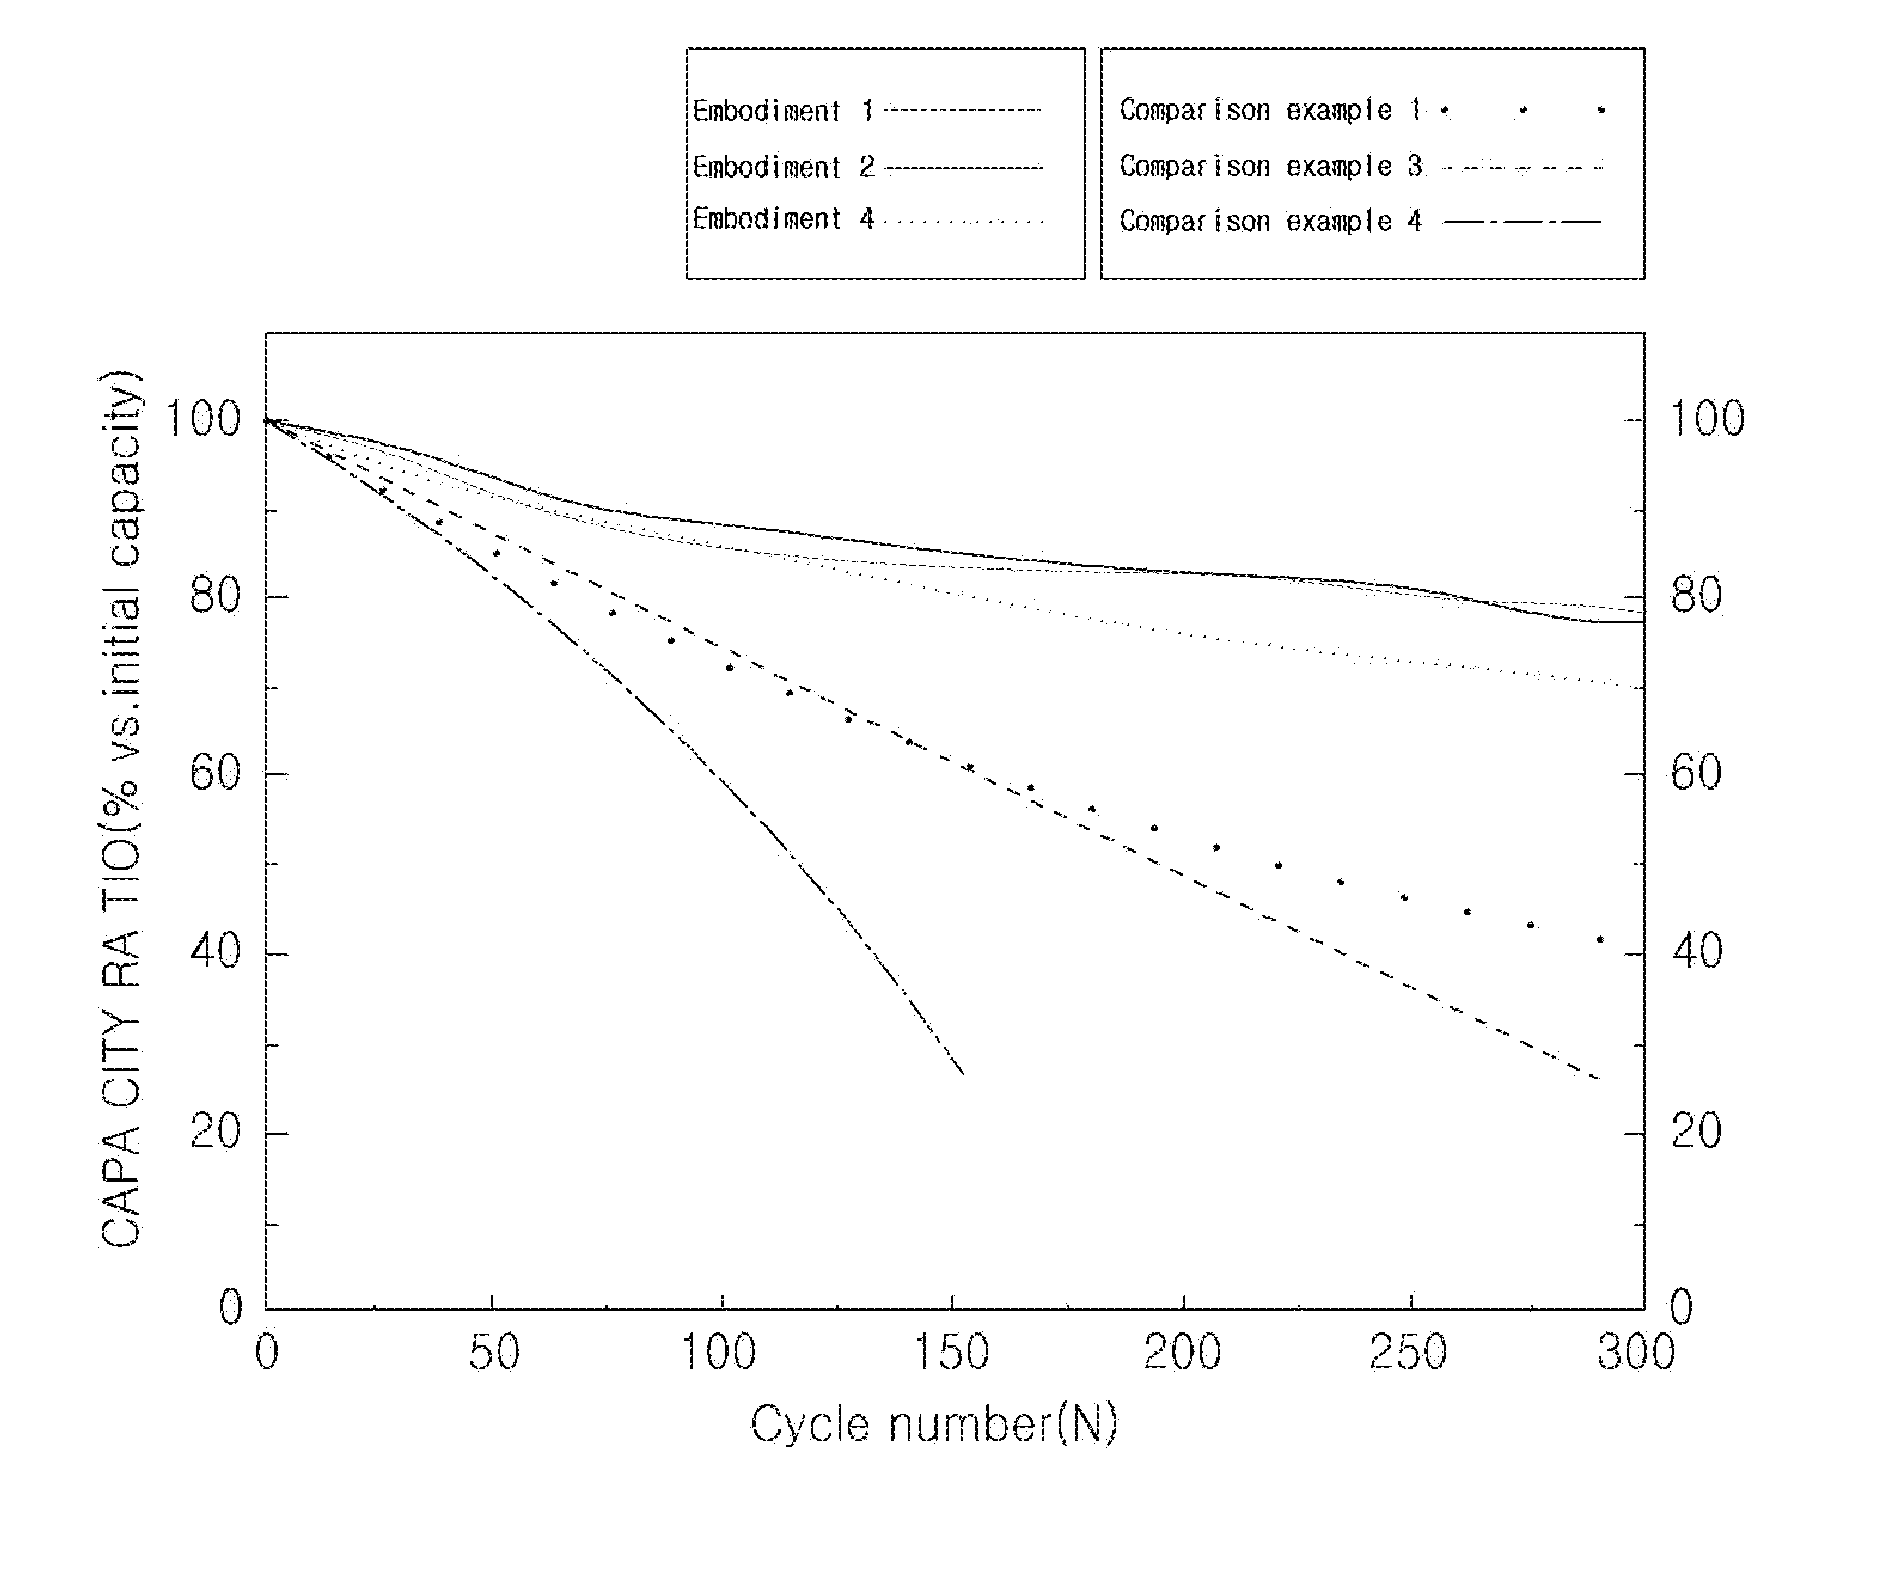 Lithium secondary battery including water-dispersible binder, conduction agent, and fluoroethylenecarbonate